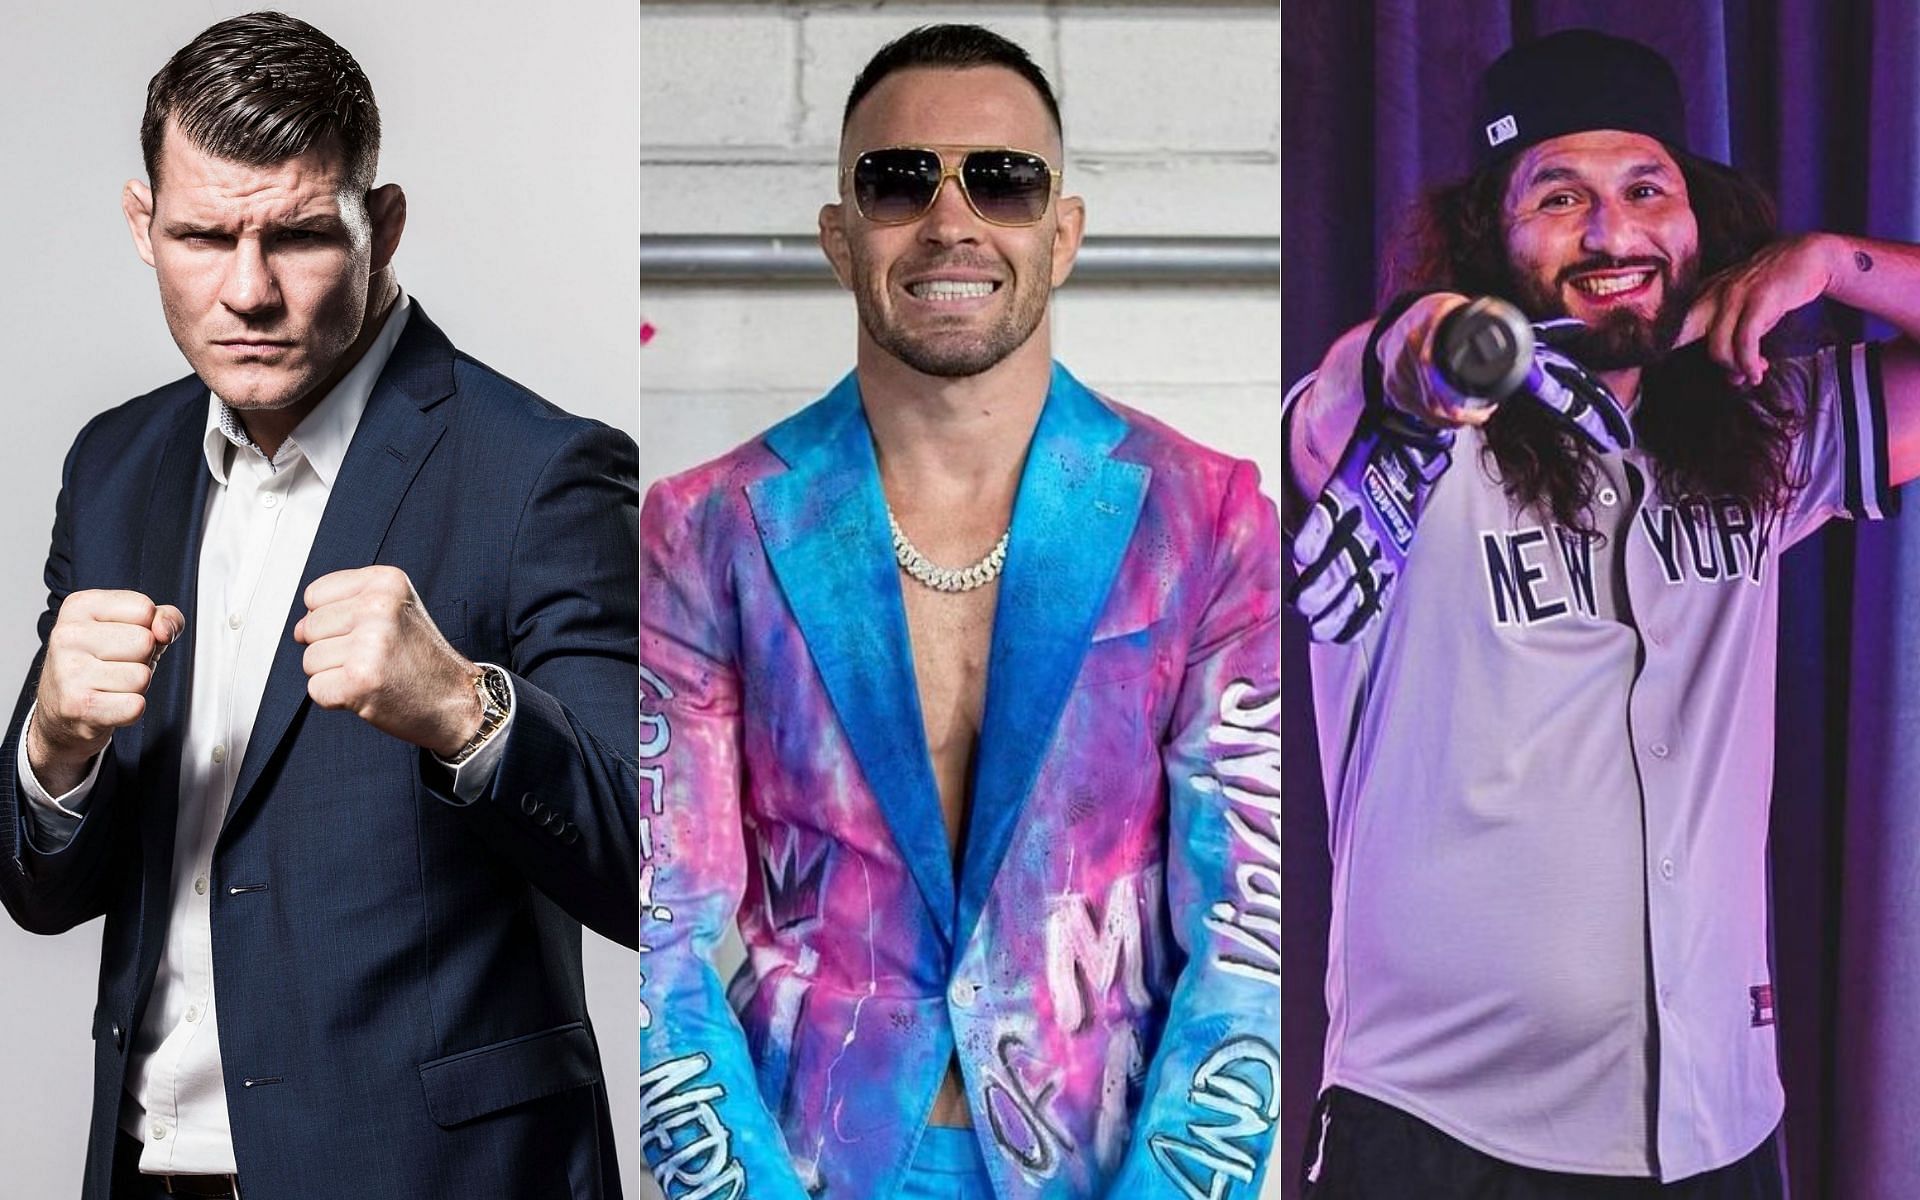 Michael Bisping (left), Colby Covington (middle) and Jorge Masvidal (right)